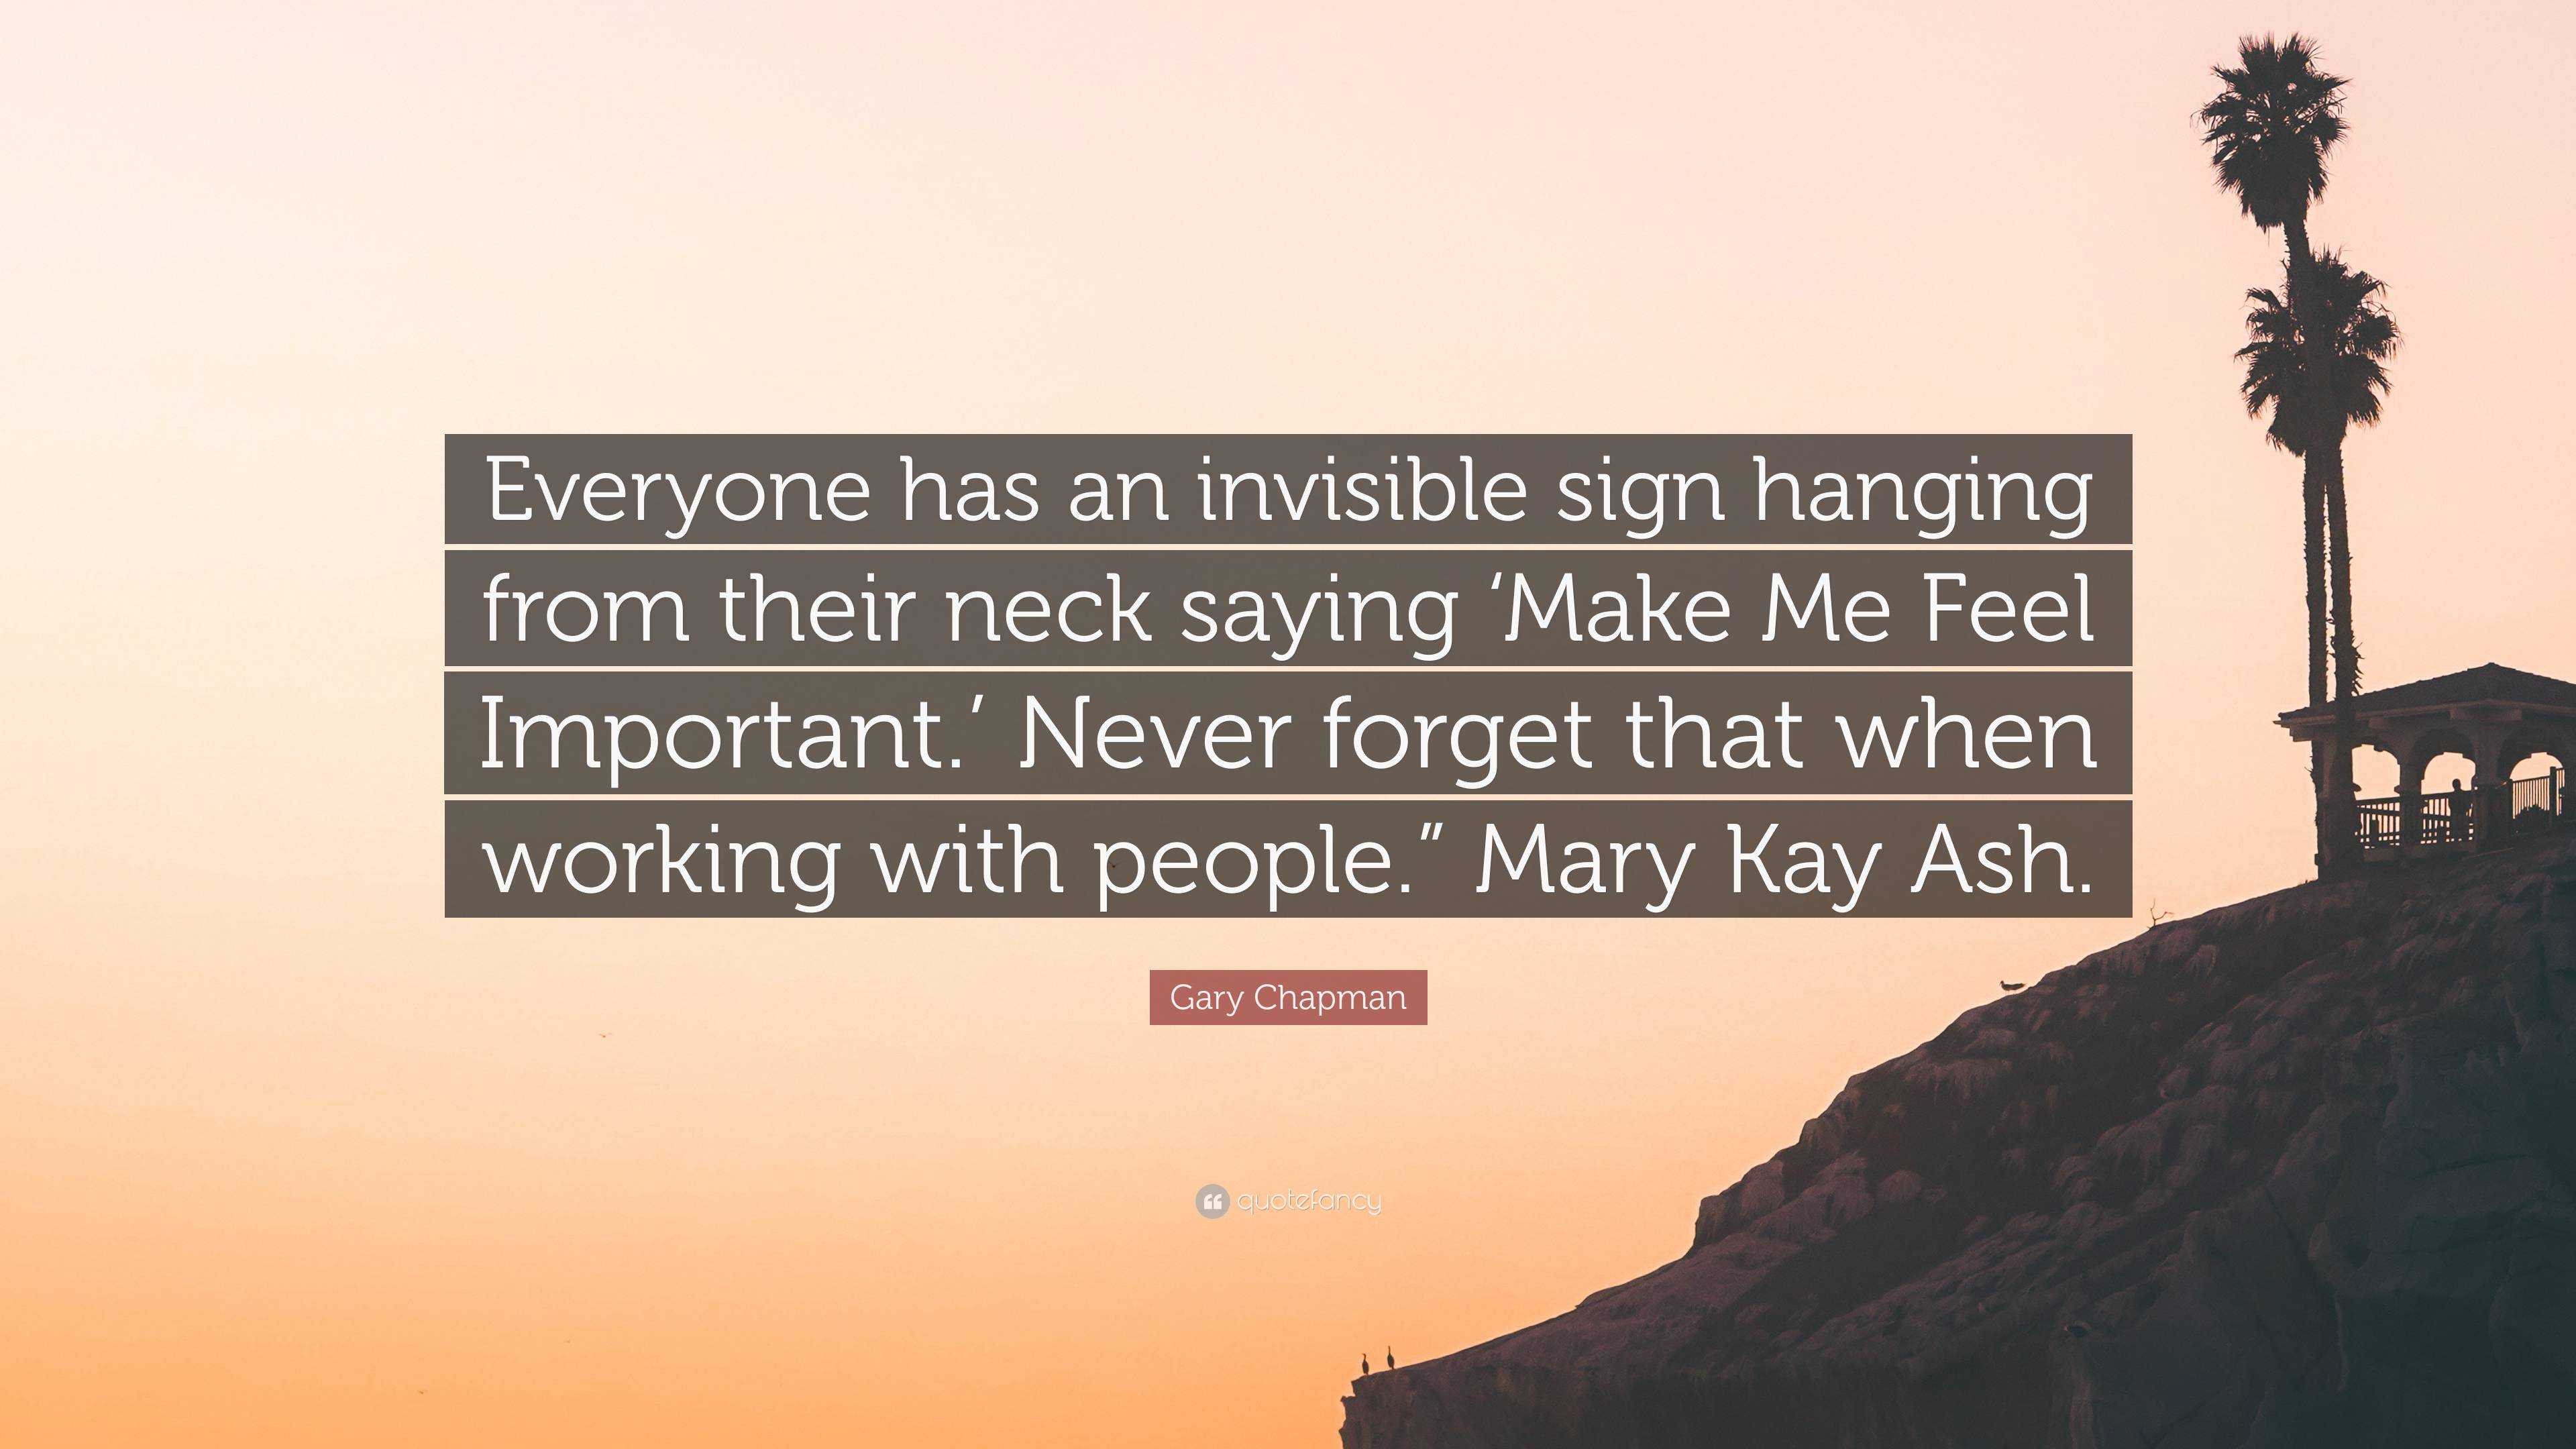 Gary Chapman Quote: “Everyone has an invisible sign hanging from their ...